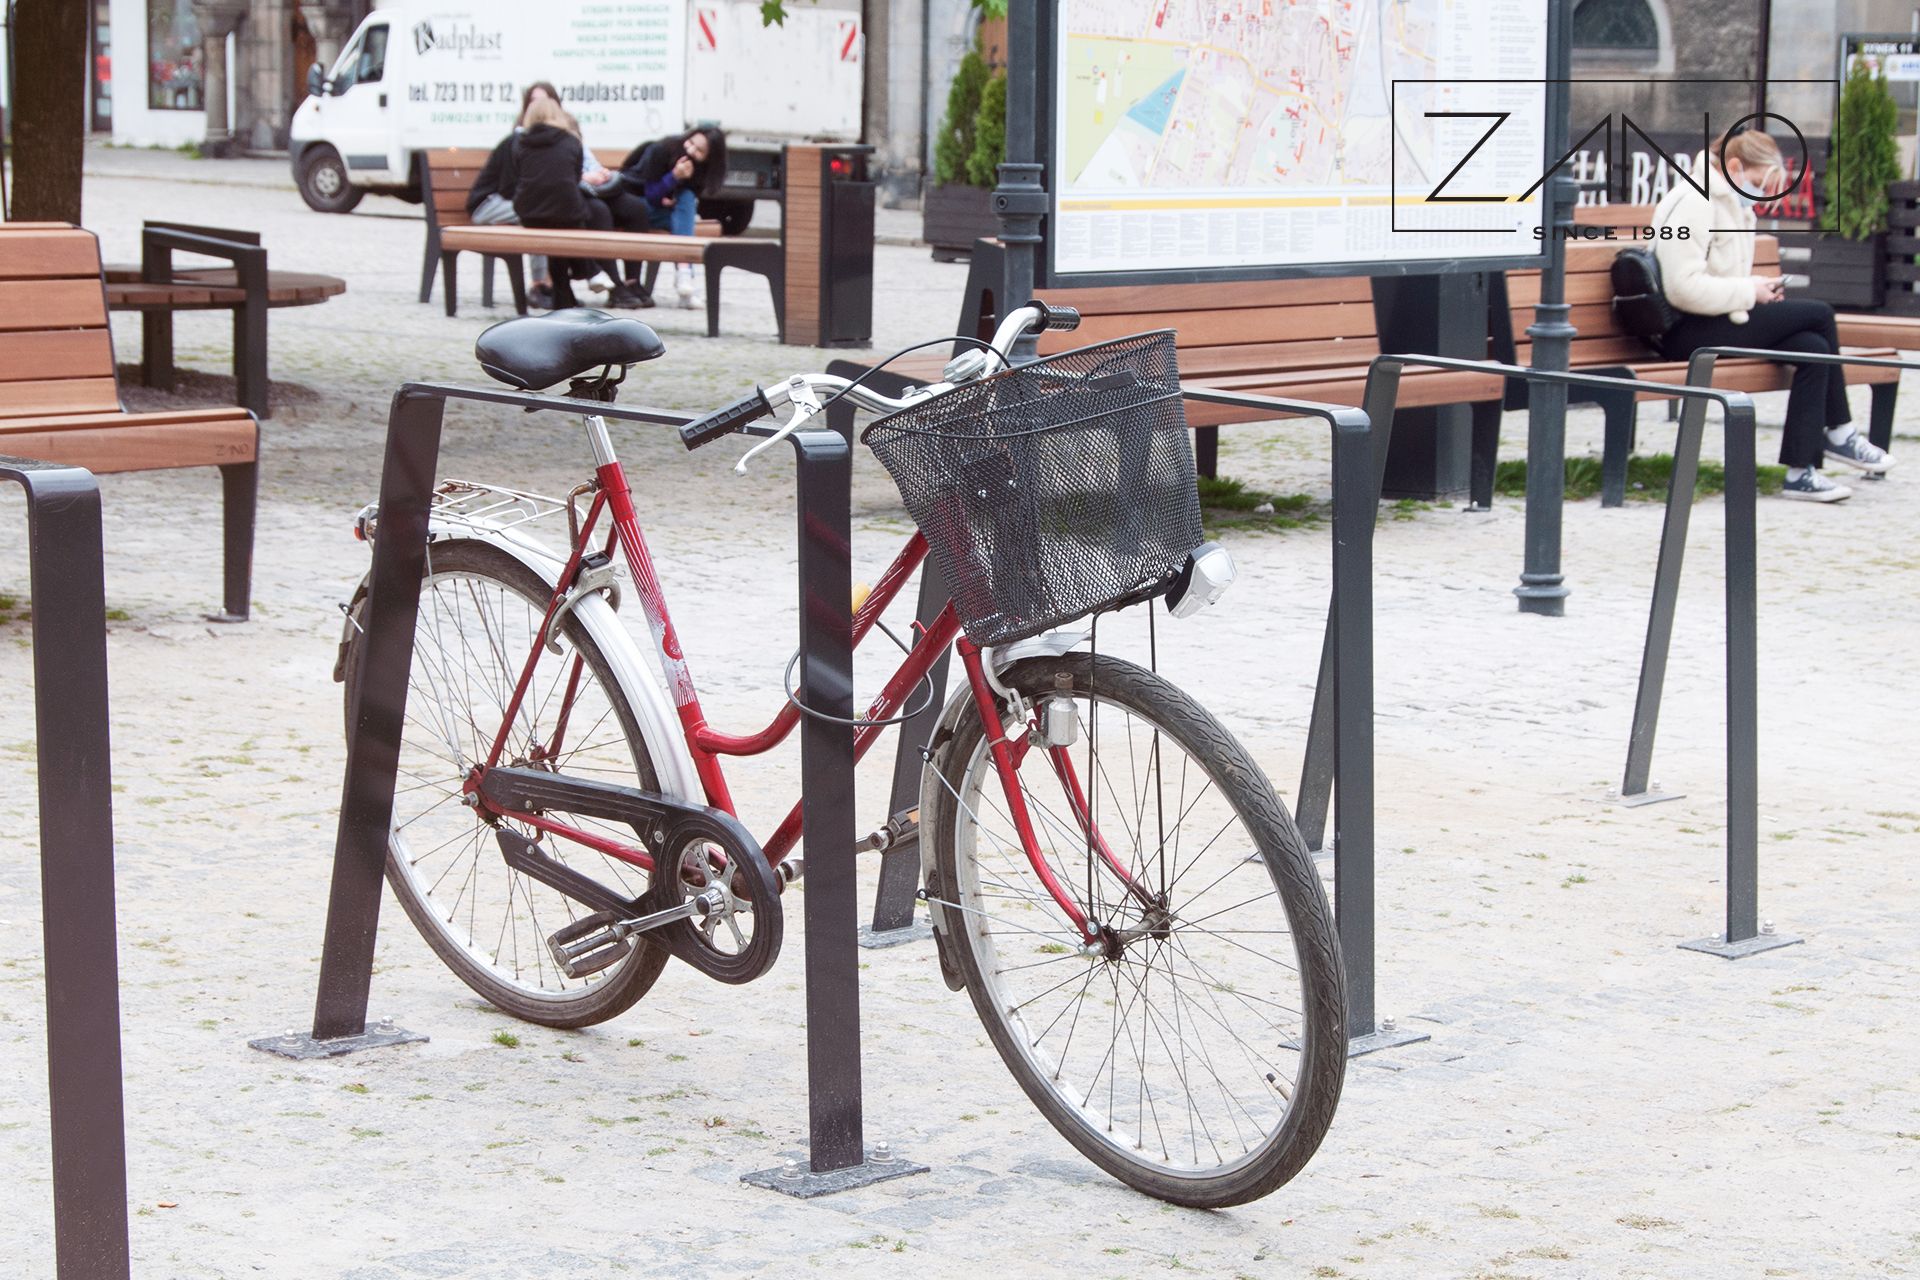 ZANO street bicycle racks and bicycle stands